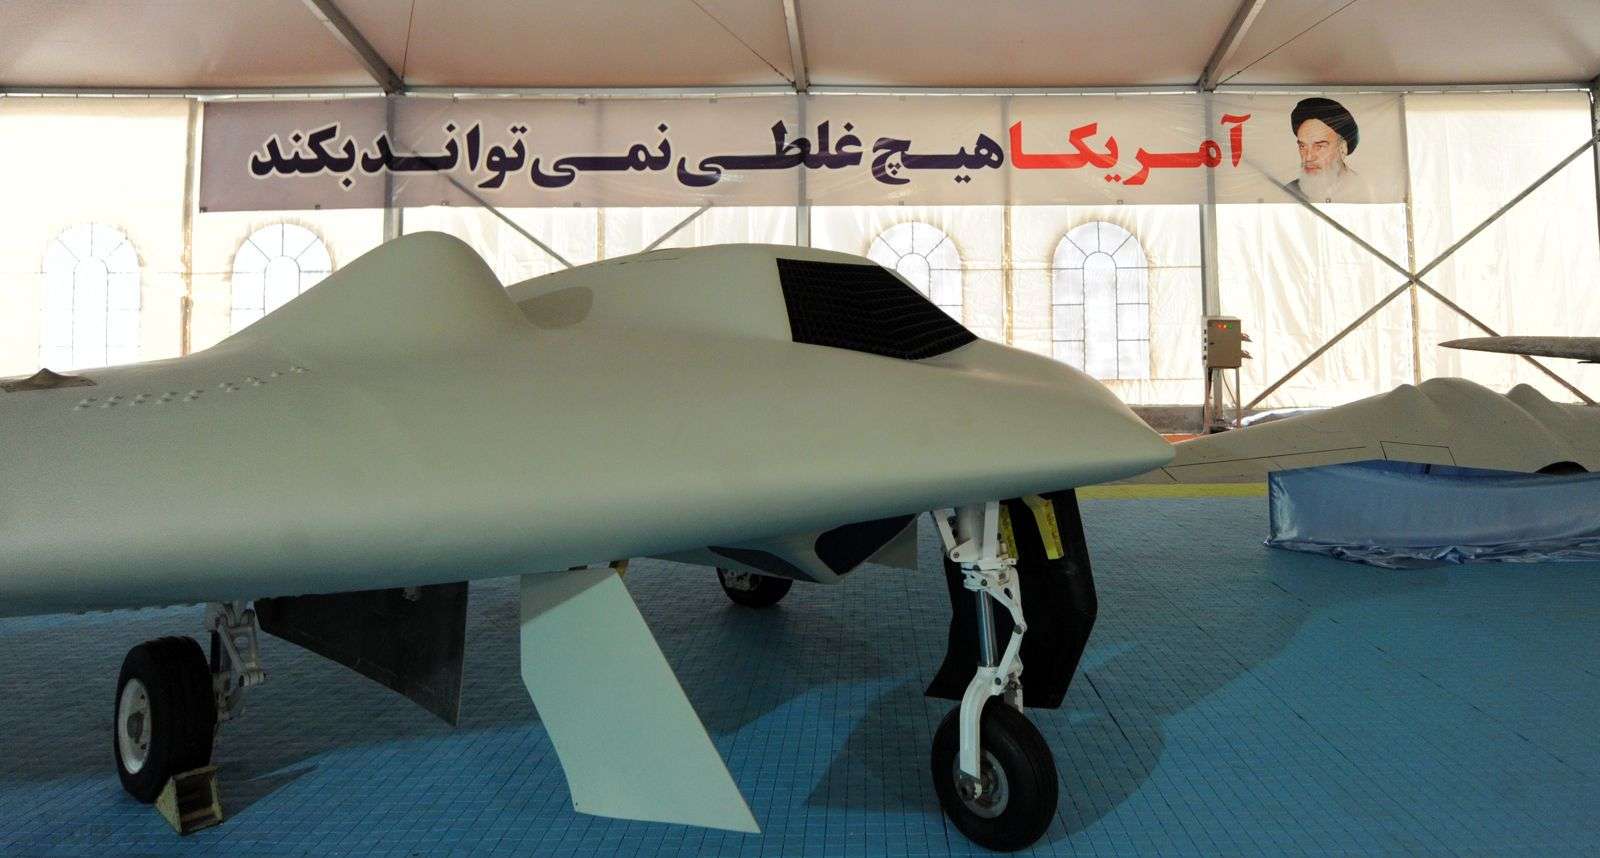 Foto: Drone Siluman RQ-170 Buatan Iran  <img src="https://www.islamtimes.org/images/picture_icon.gif" width="16" height="13" border="0" align="top">